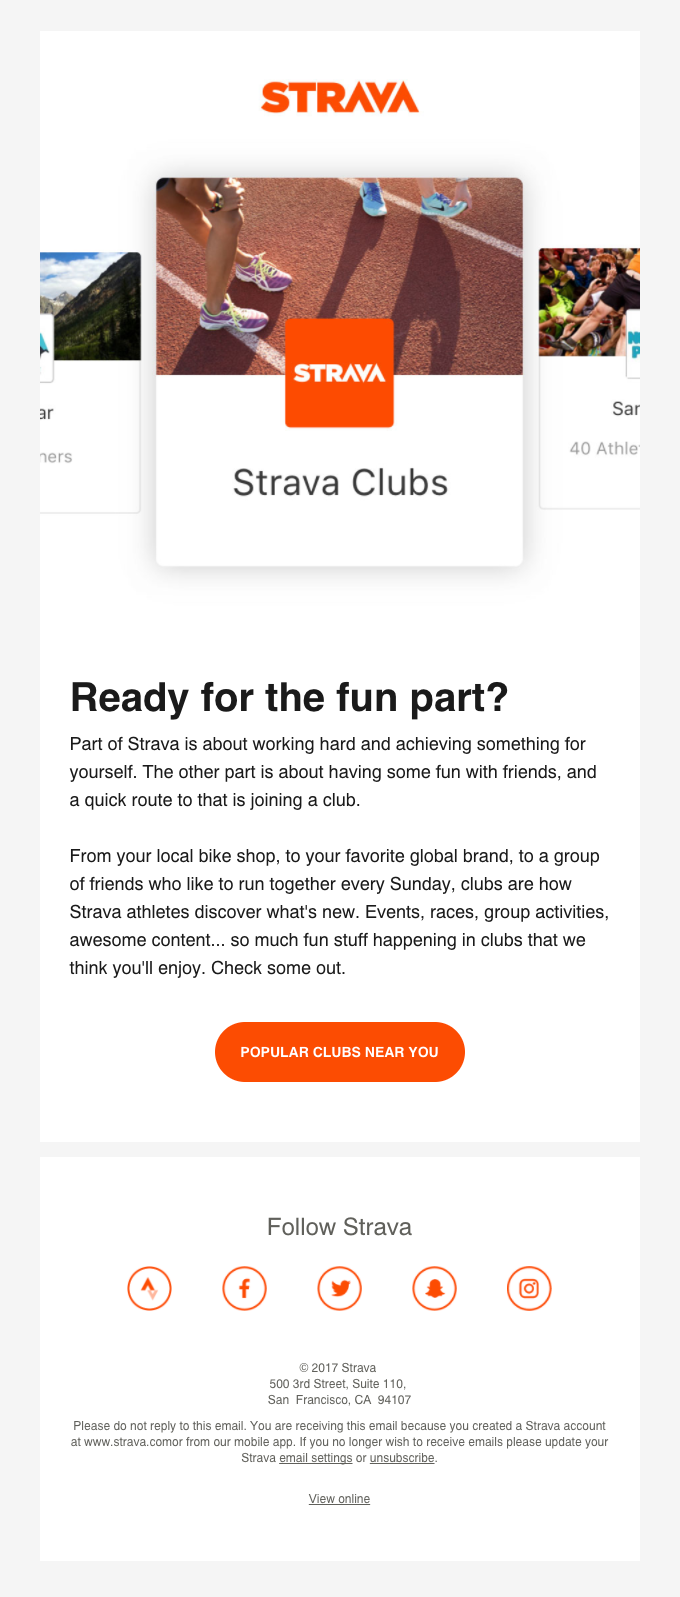 Join a club and Strava will be even more fun